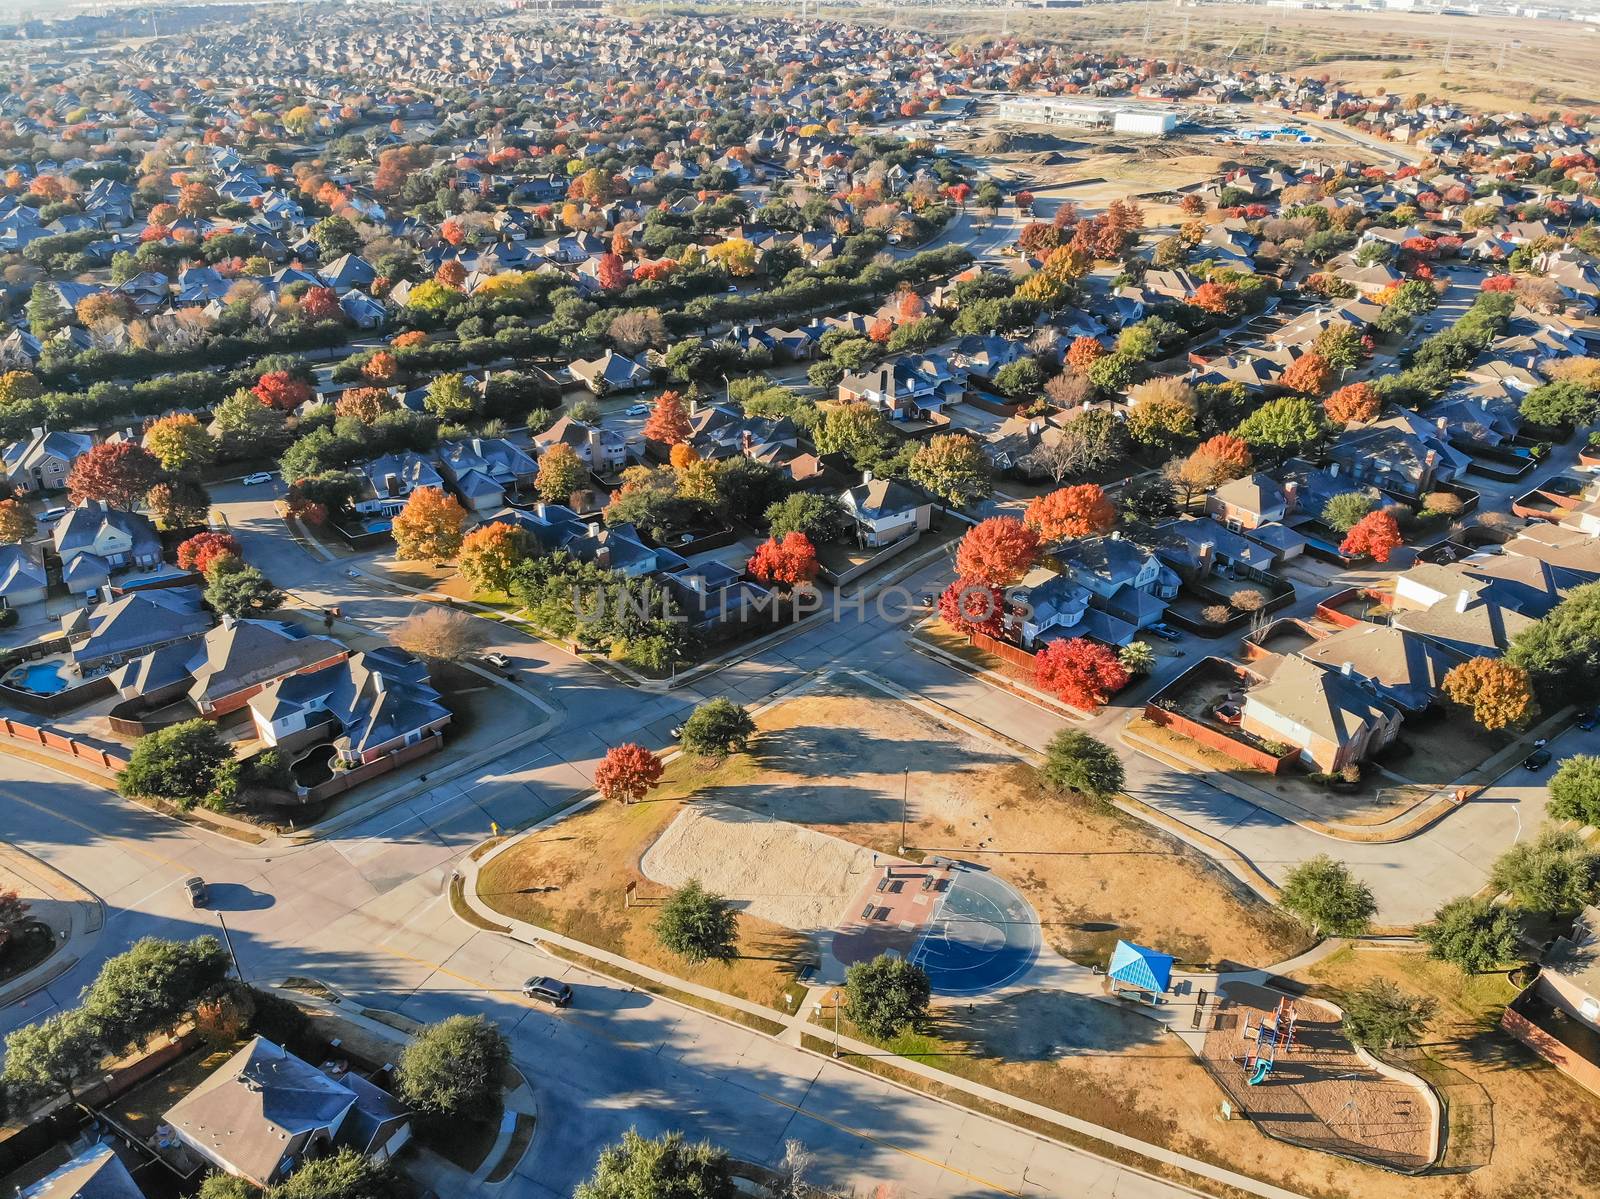 Top view community playground near residential area with row of single-family detached house and colorful autumn leaves. Urban sprawl subdivision in background